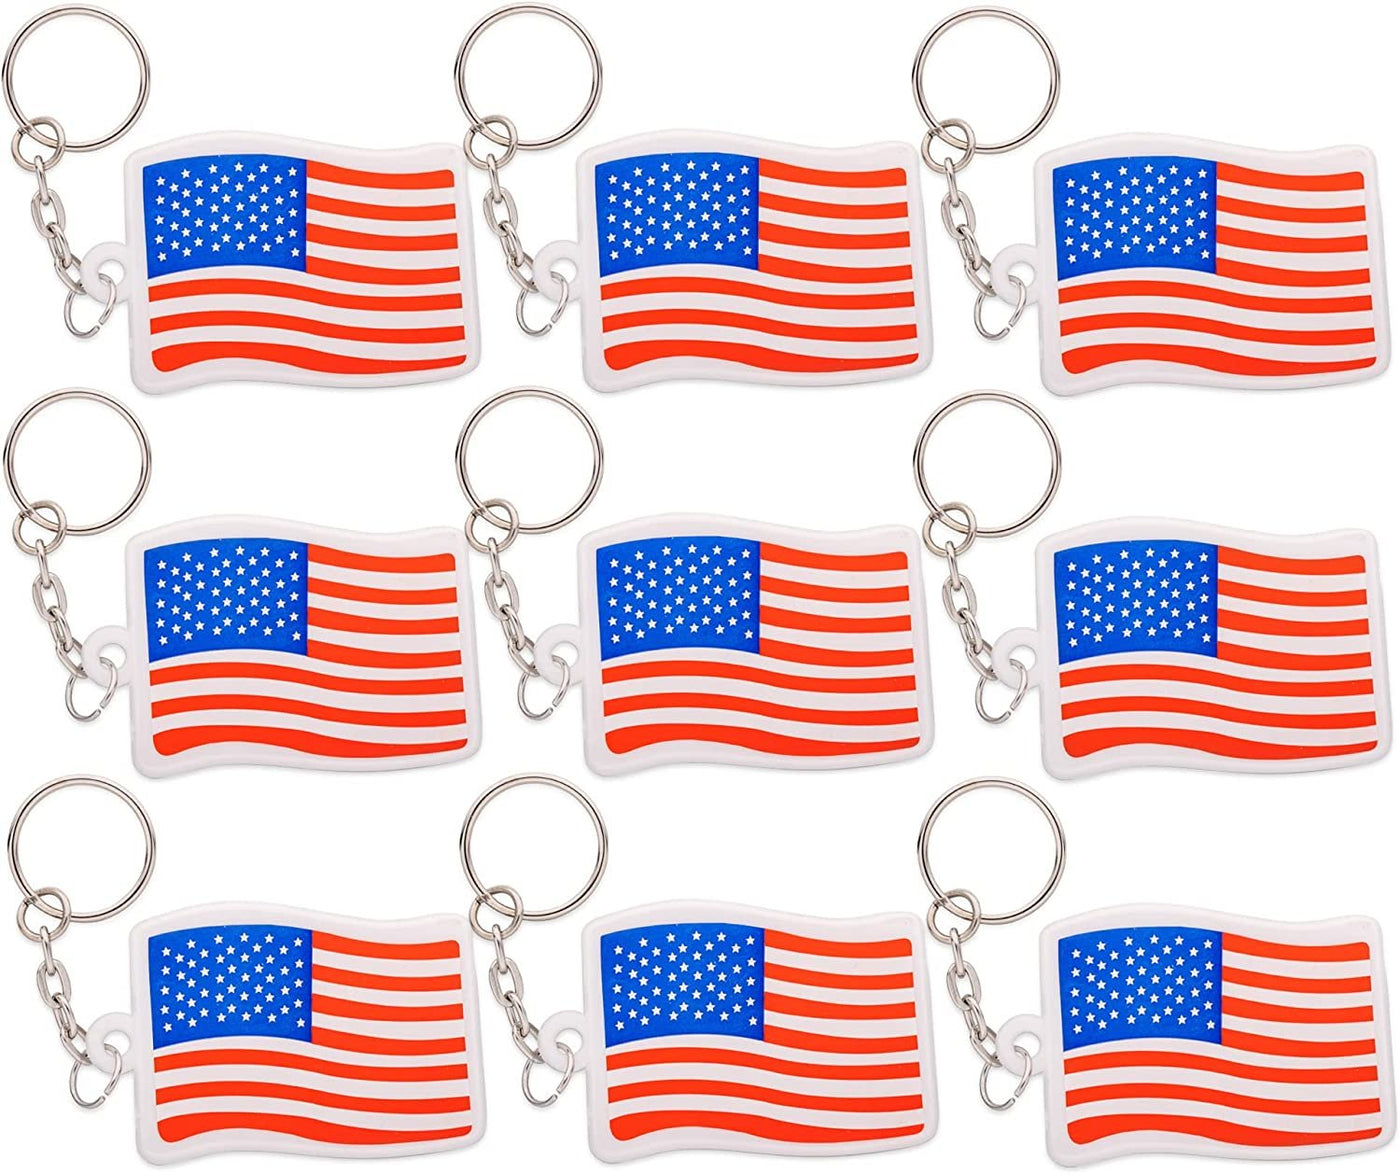 Set of 24 American Flag Keychains, 4th of July Party Favors, USA Flag Key Chains for Independence, Memorial, and Veterans Day, United States Patriotic Accessories for Kids